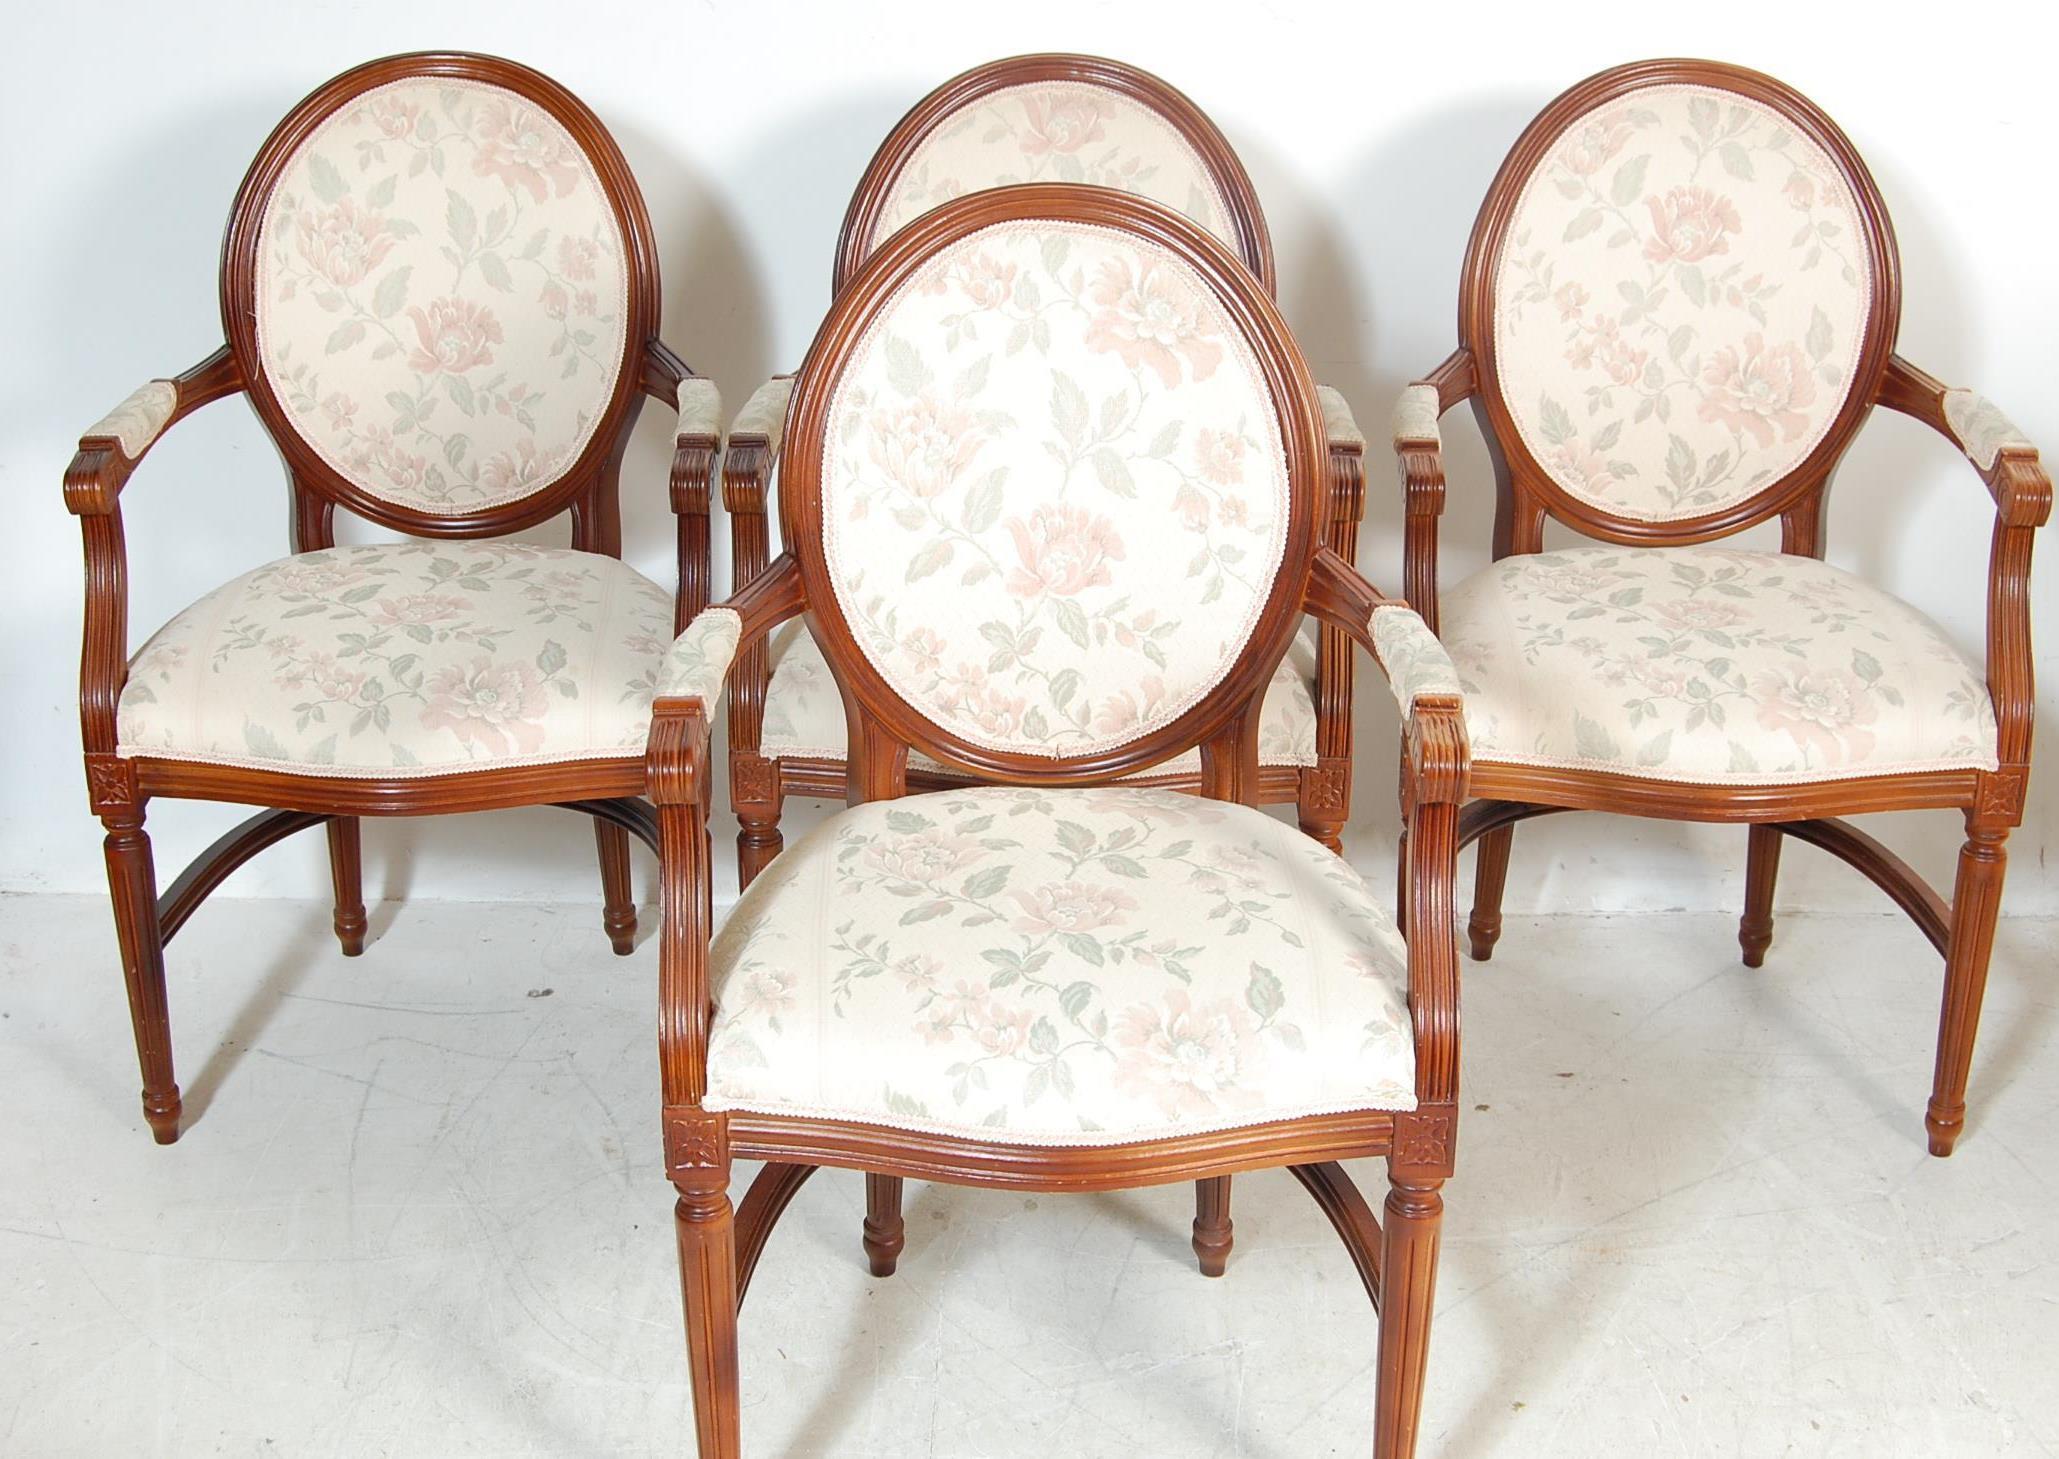 SET OF 4 FRENCH MAHOGANY FAUTEUIL ARMCHAIRS - Image 2 of 4